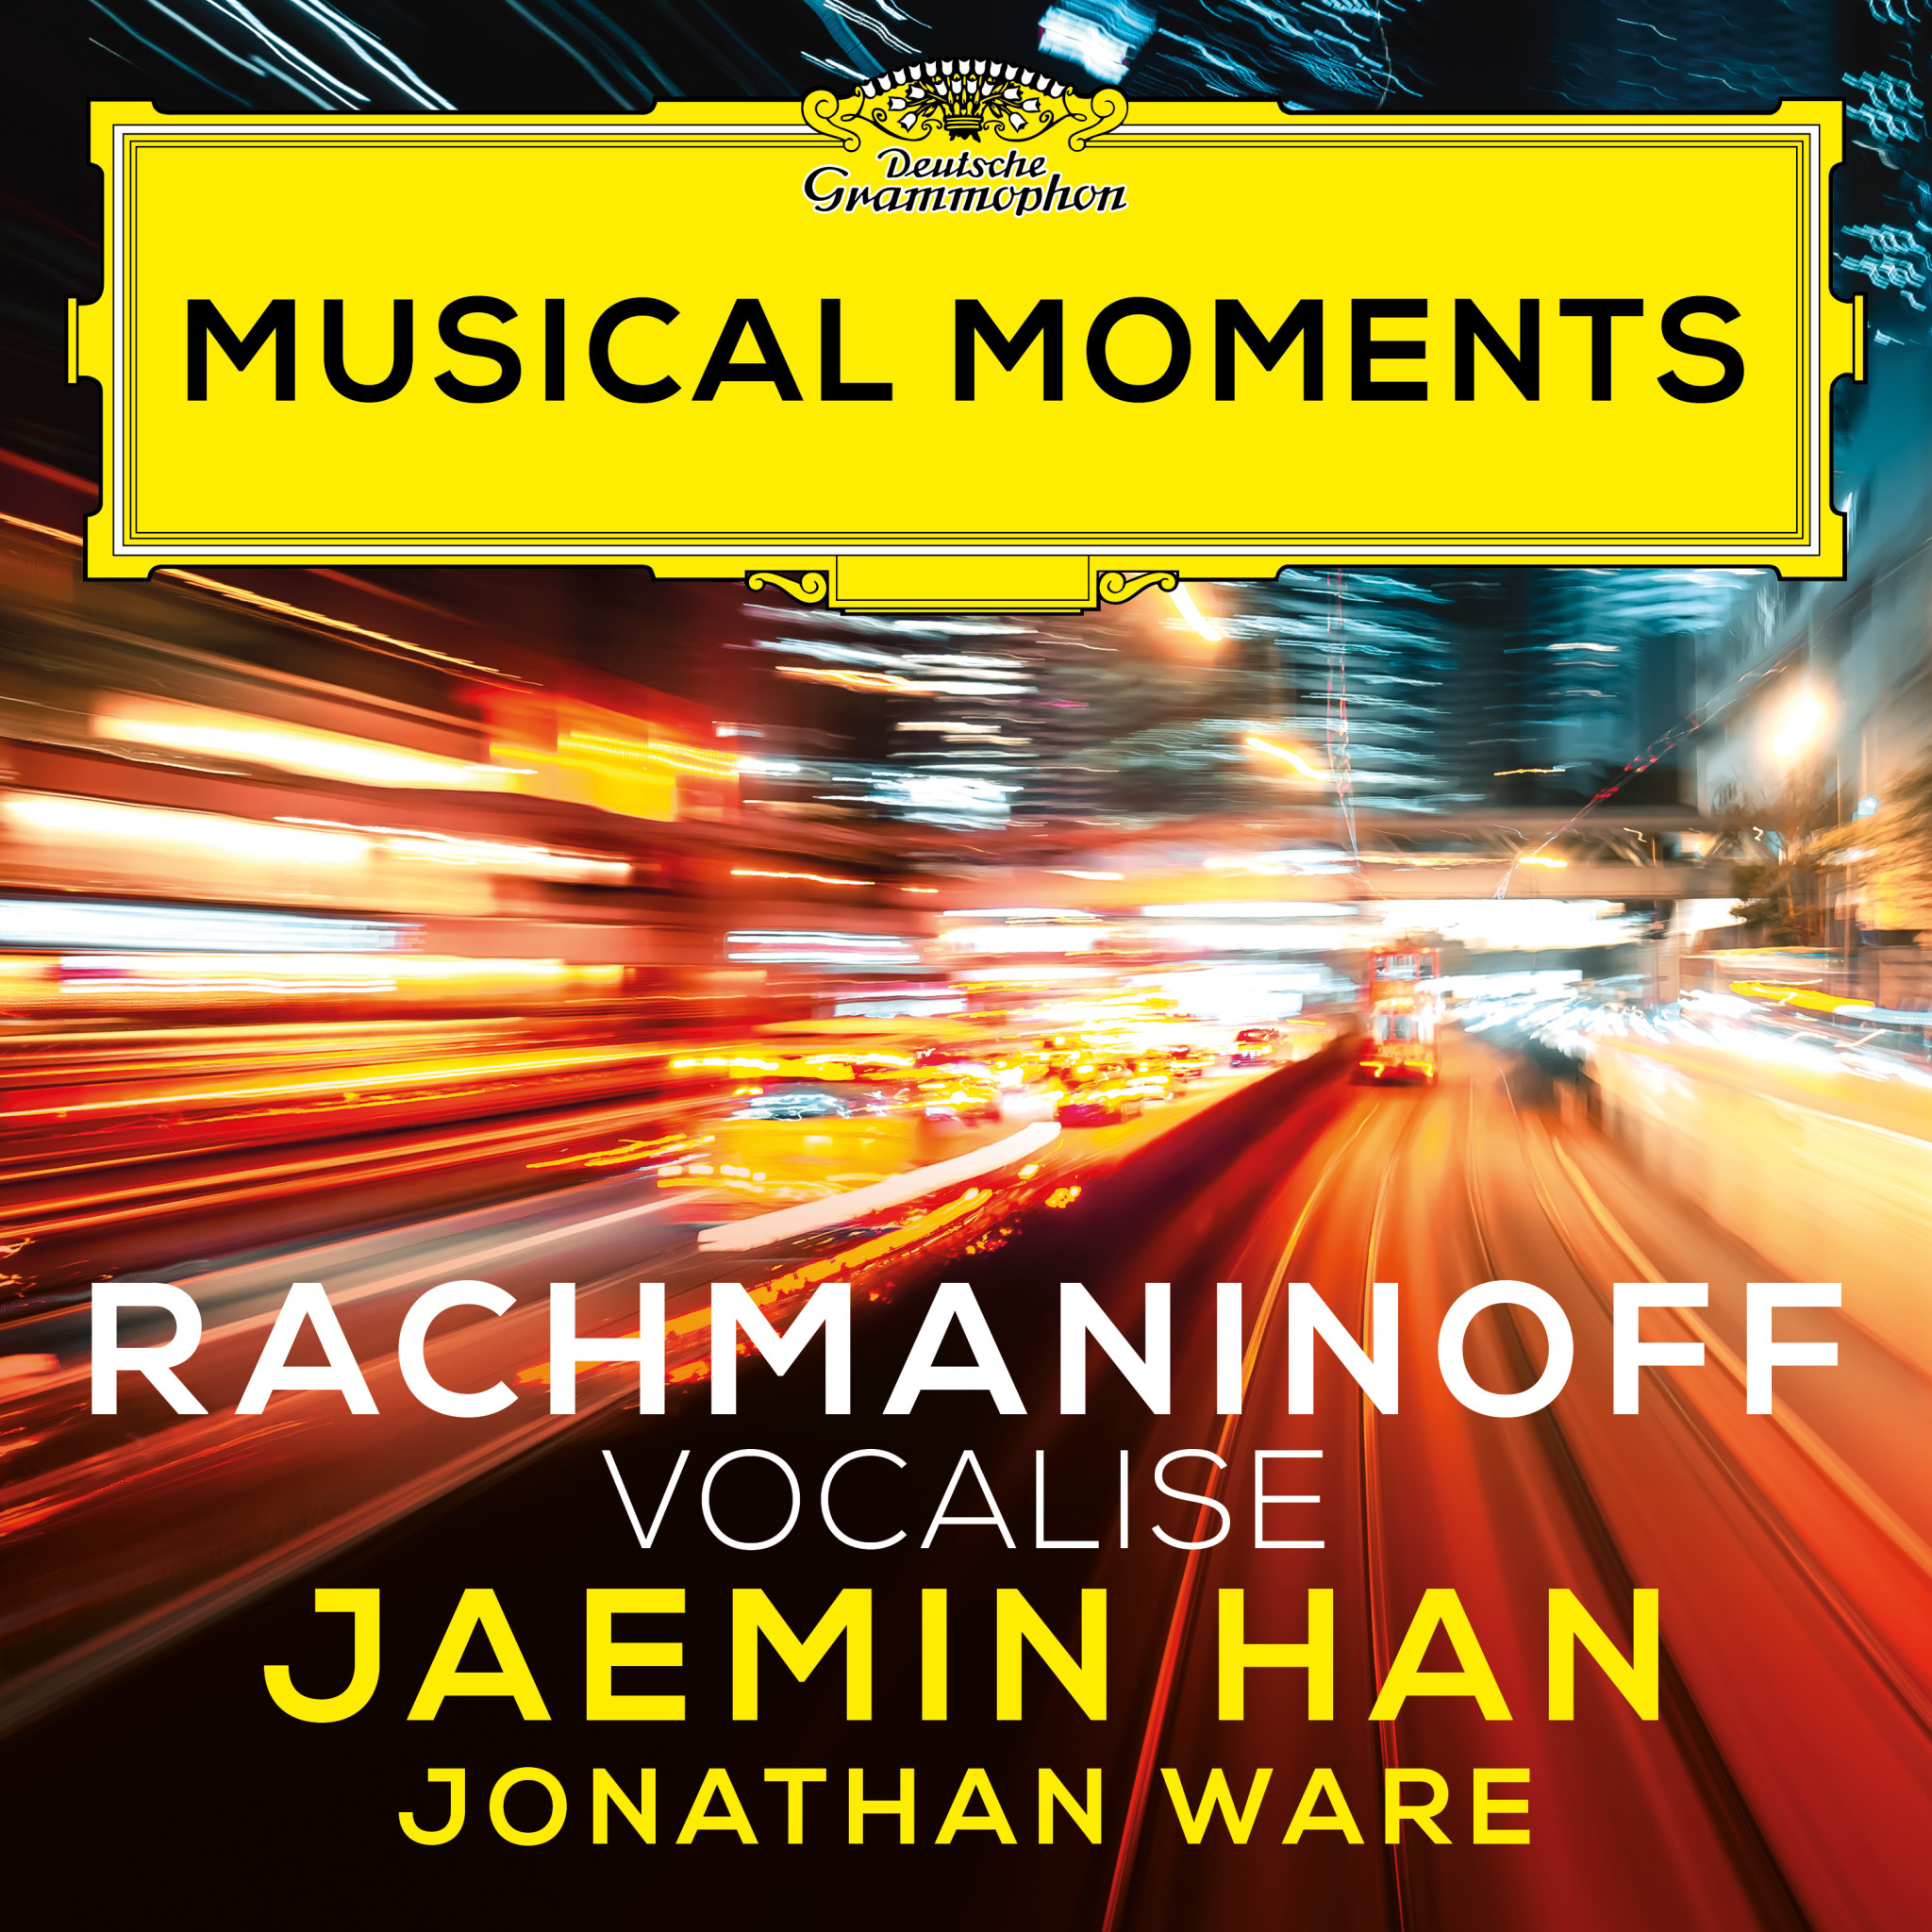 Han, Ware - Rachmaninoff: Vocalise (Musical Moments)